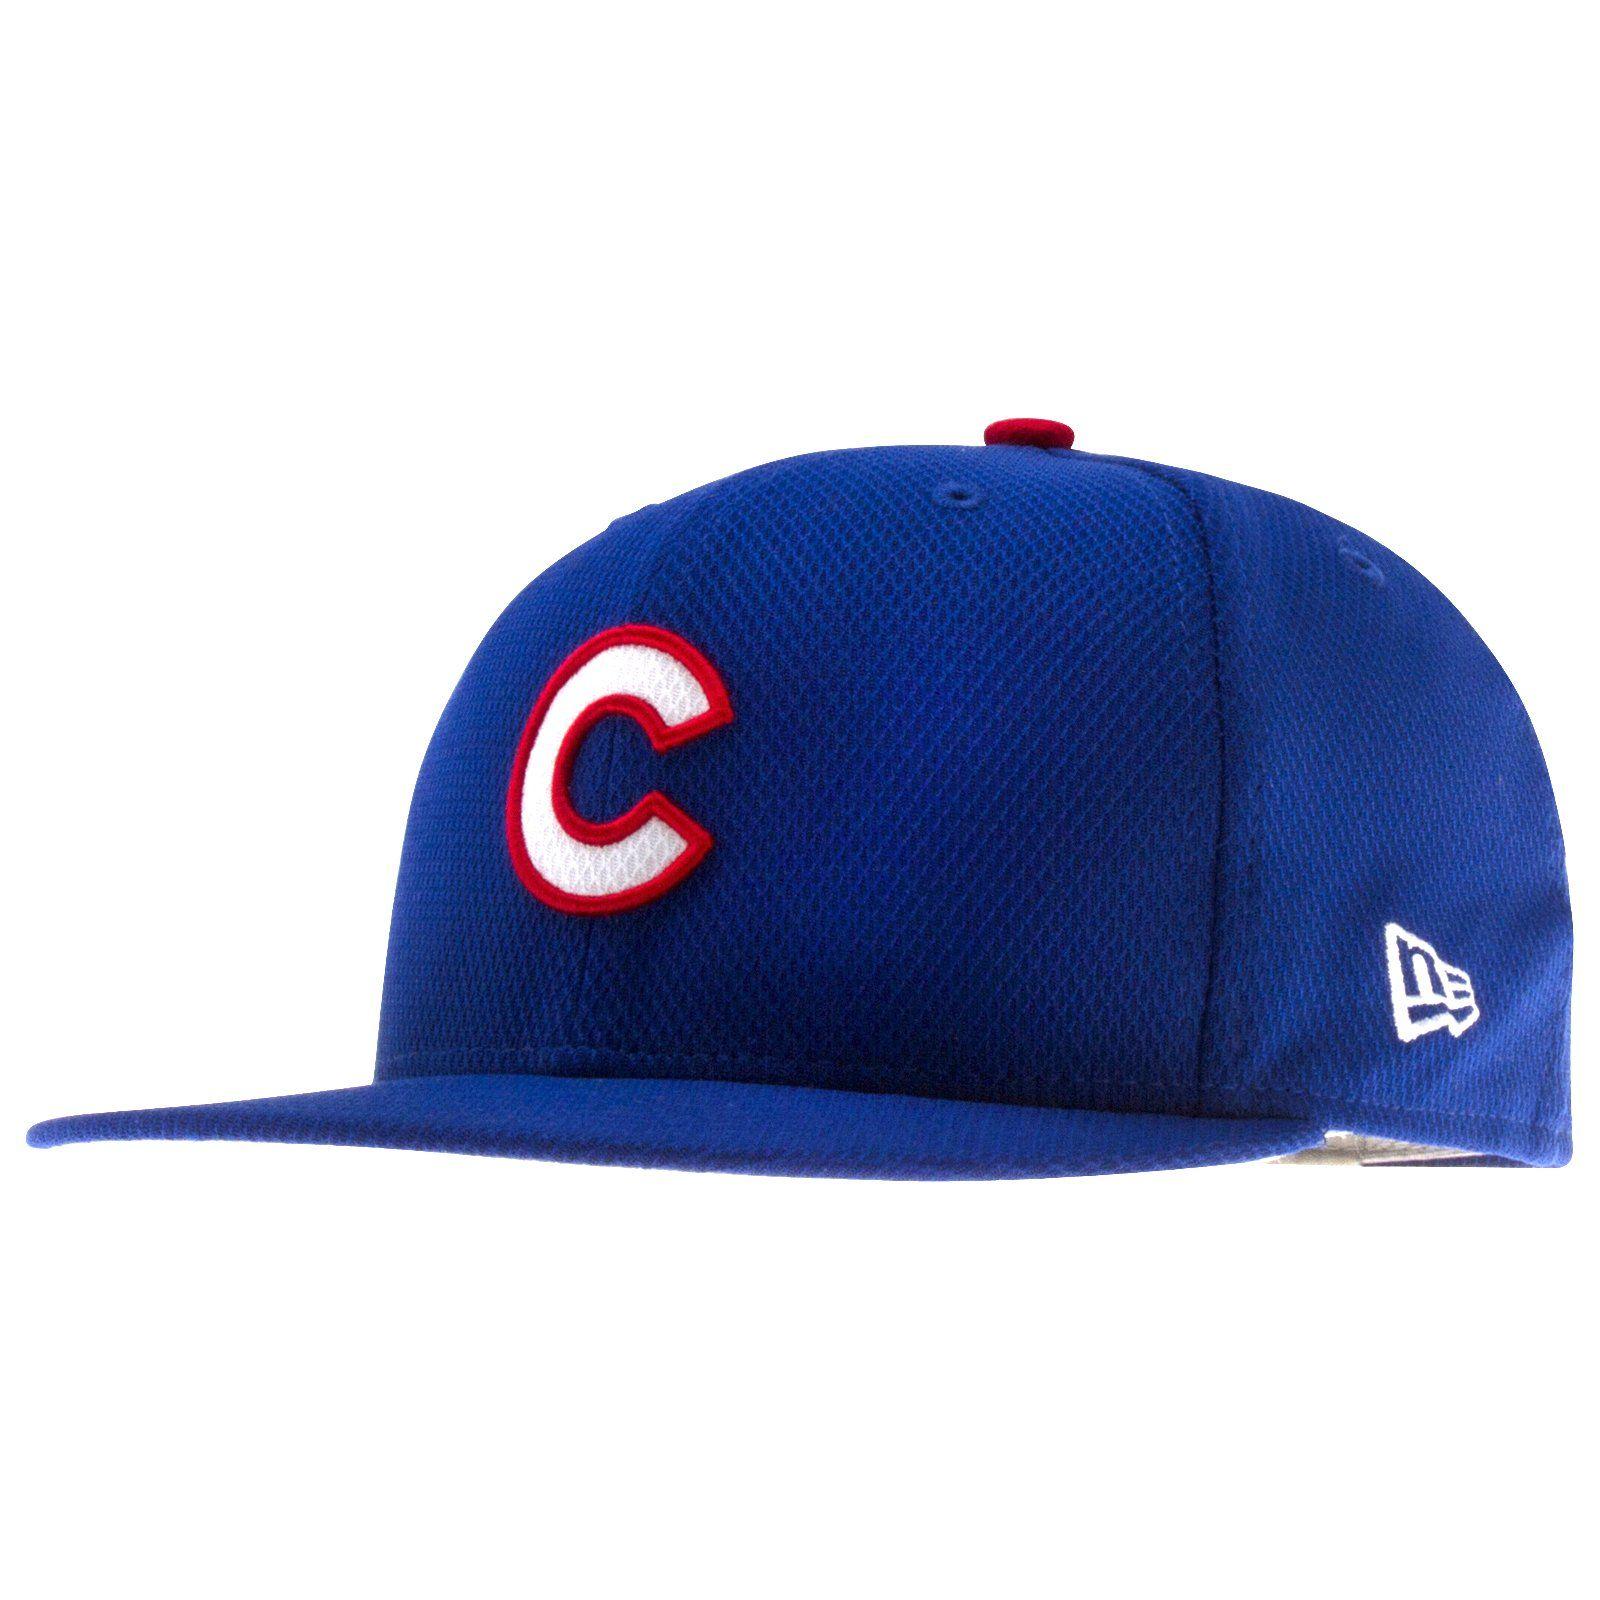 White and Red C Logo - Chicago Cubs Royal with White and Red 